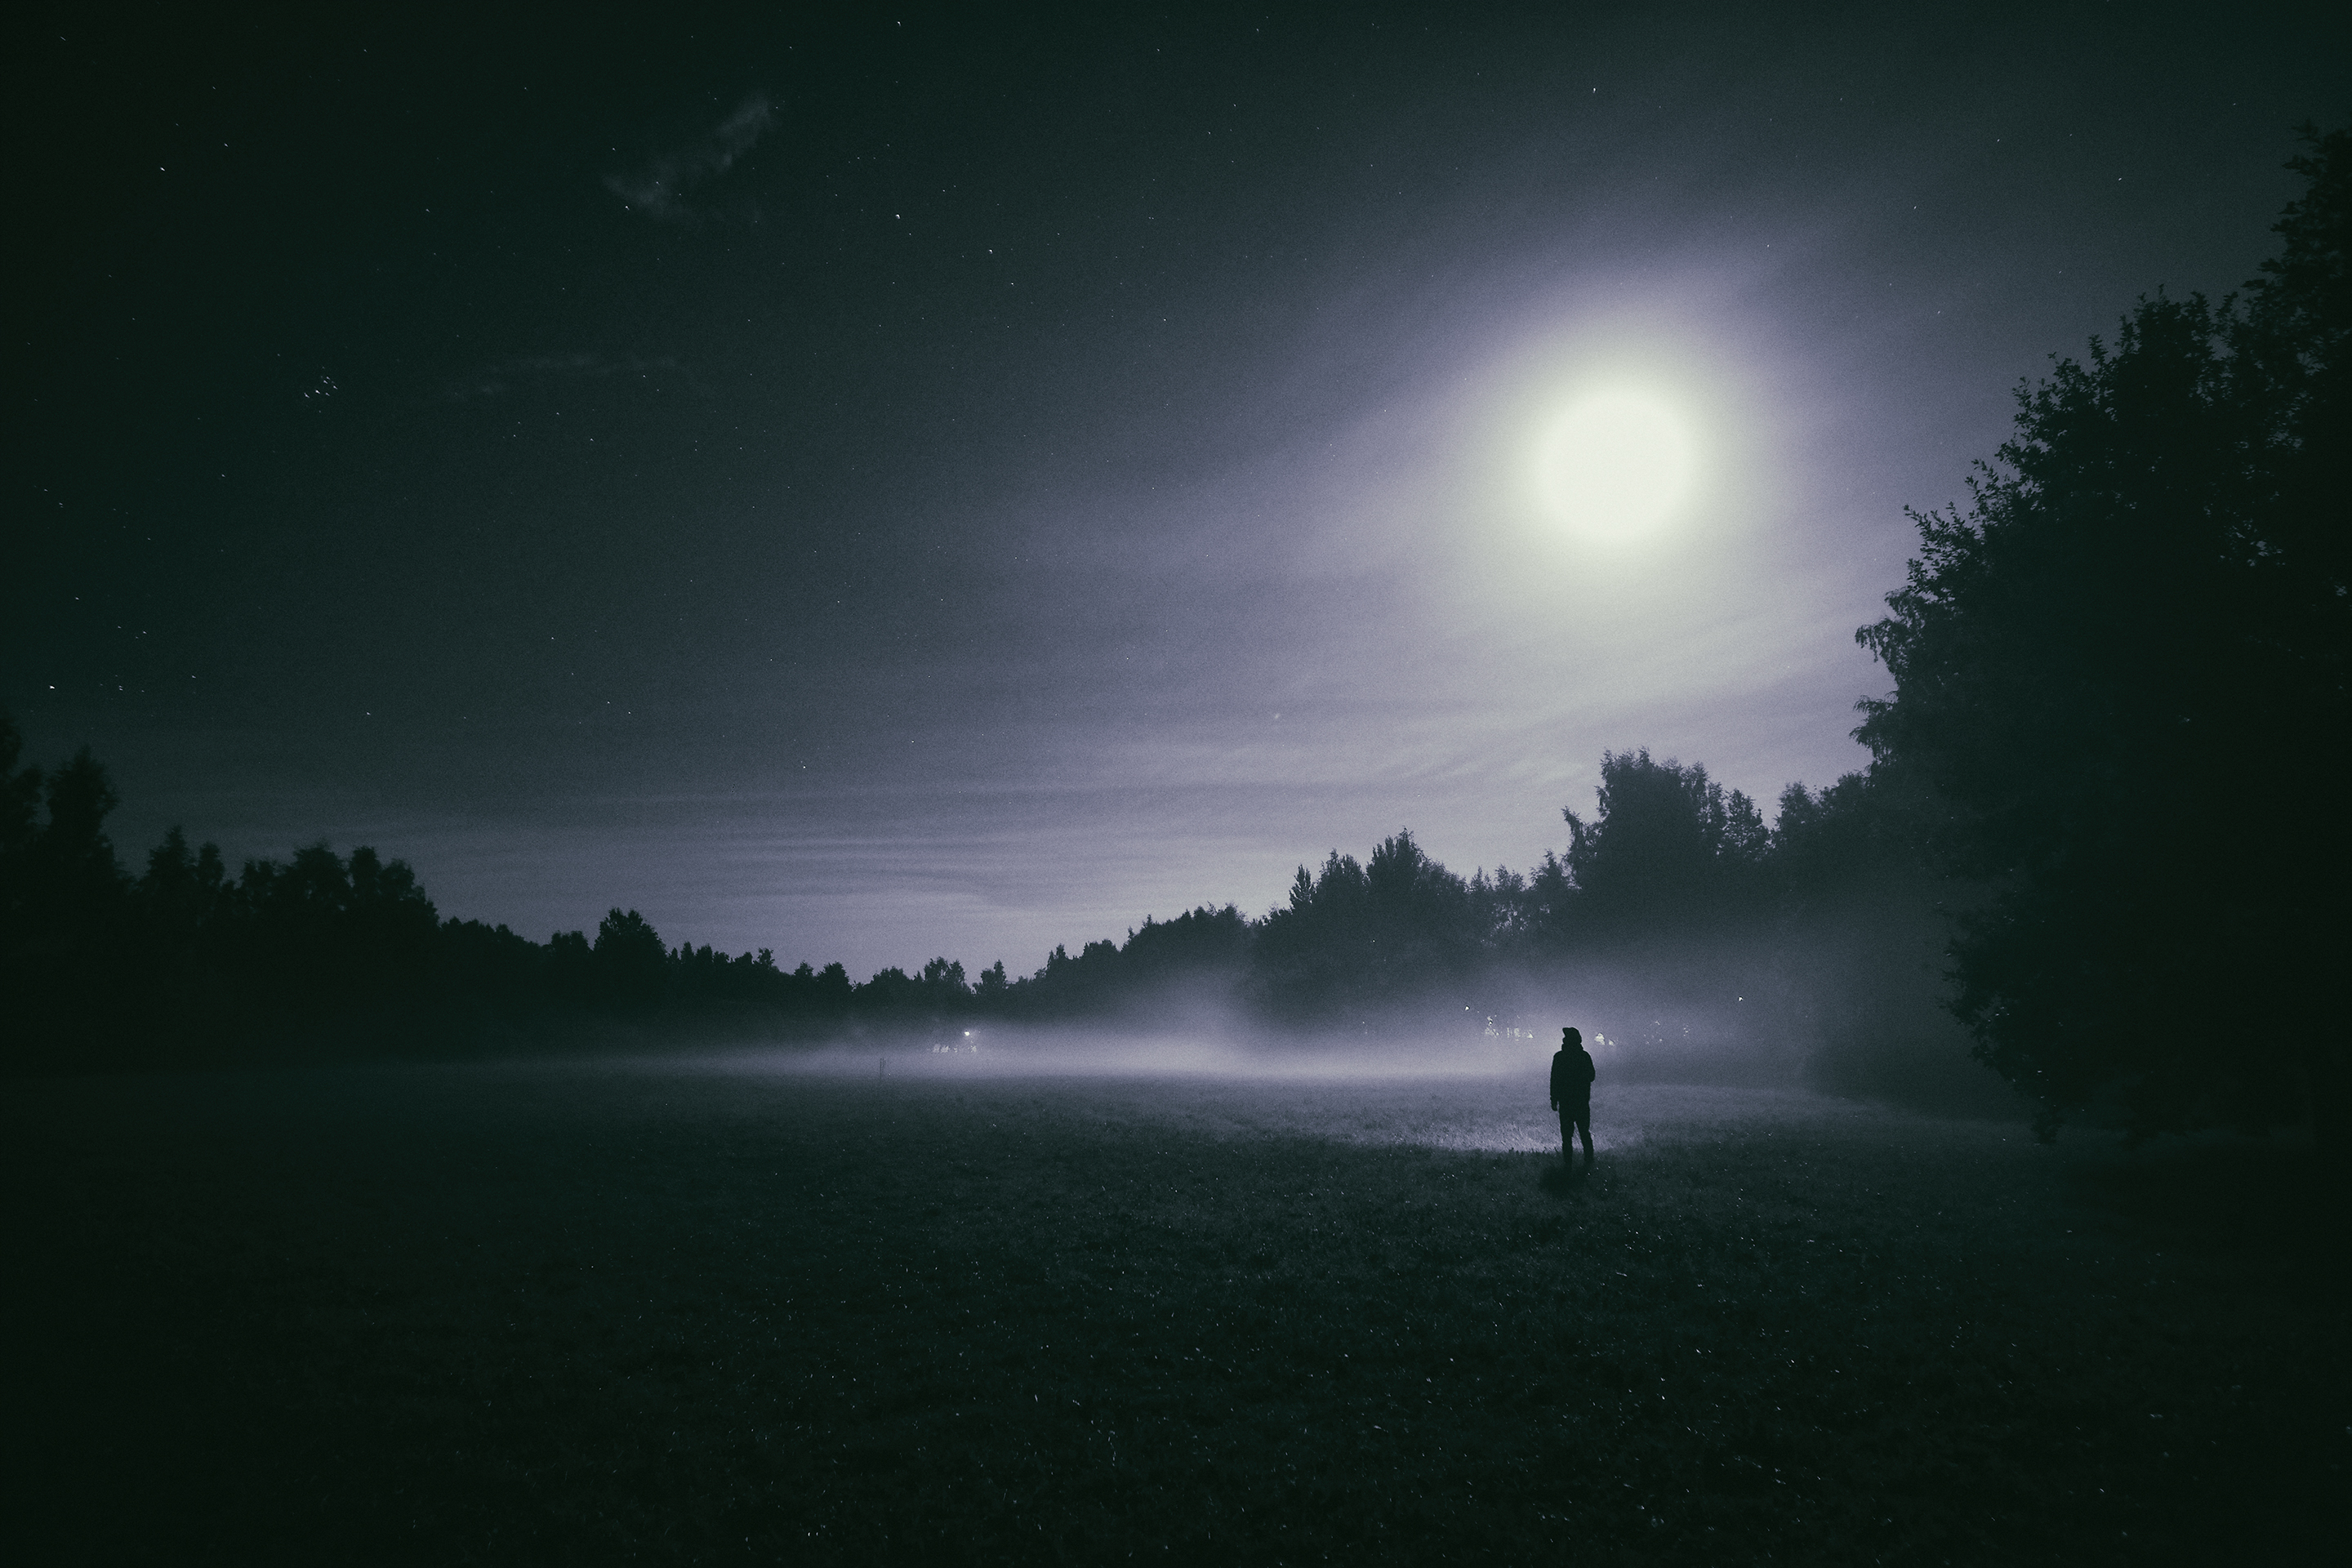 General 2880x1920 landscape nature trees forest field Moon moon rays moonlight standing mist night alone